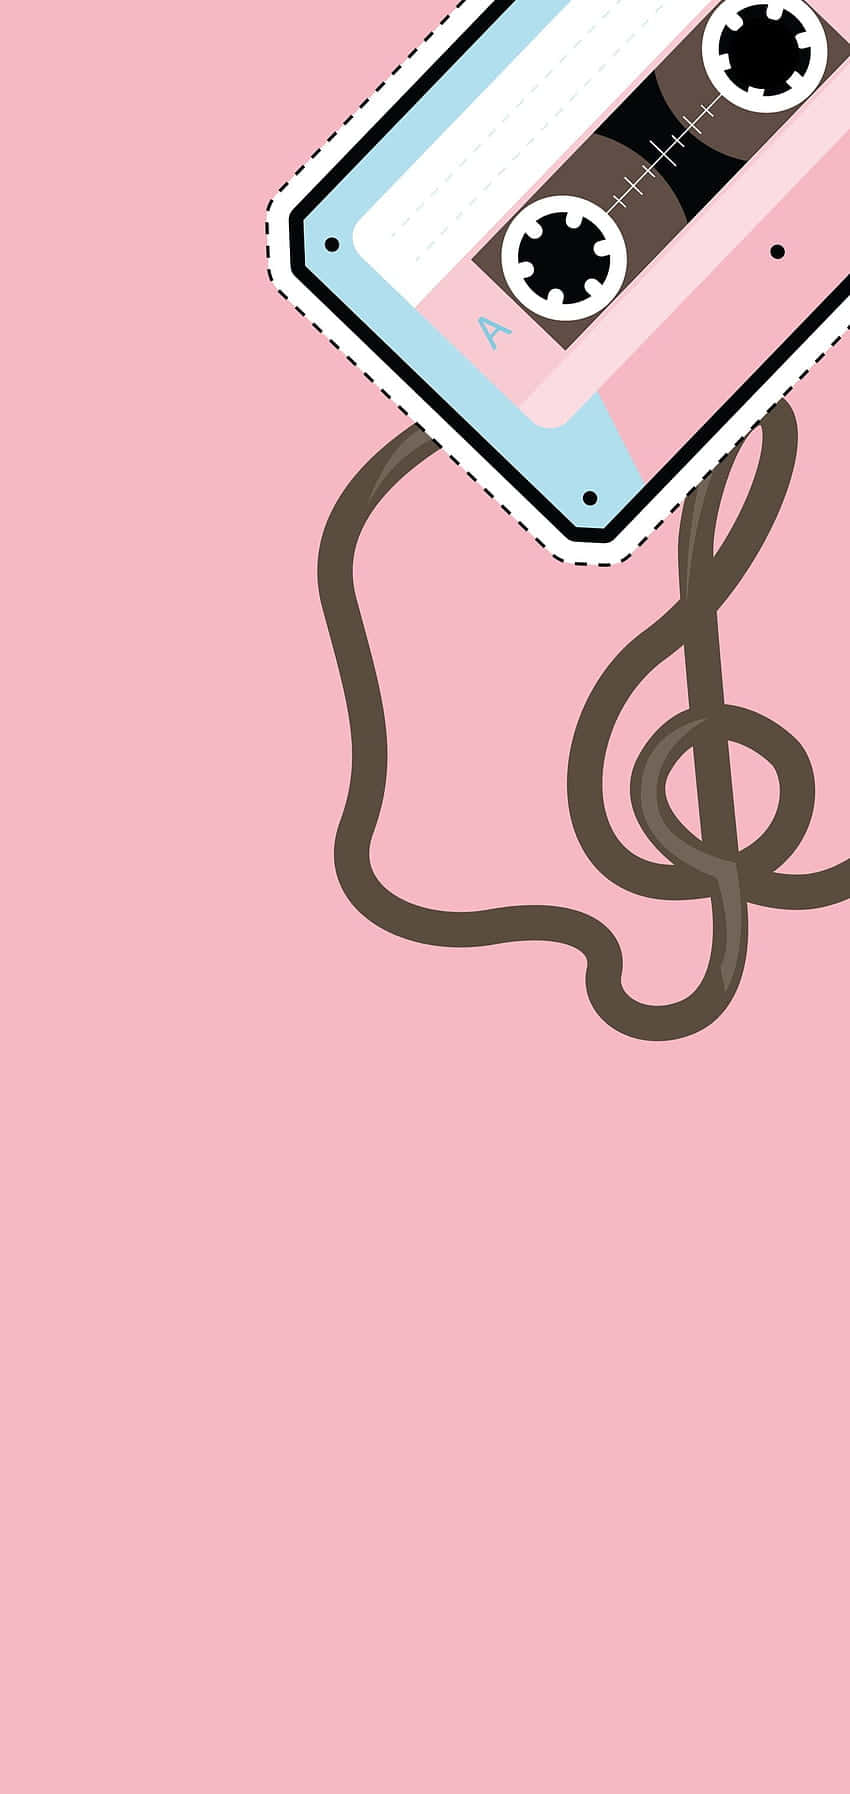 Cassette Tape Musical Note Pink Background Wallpaper